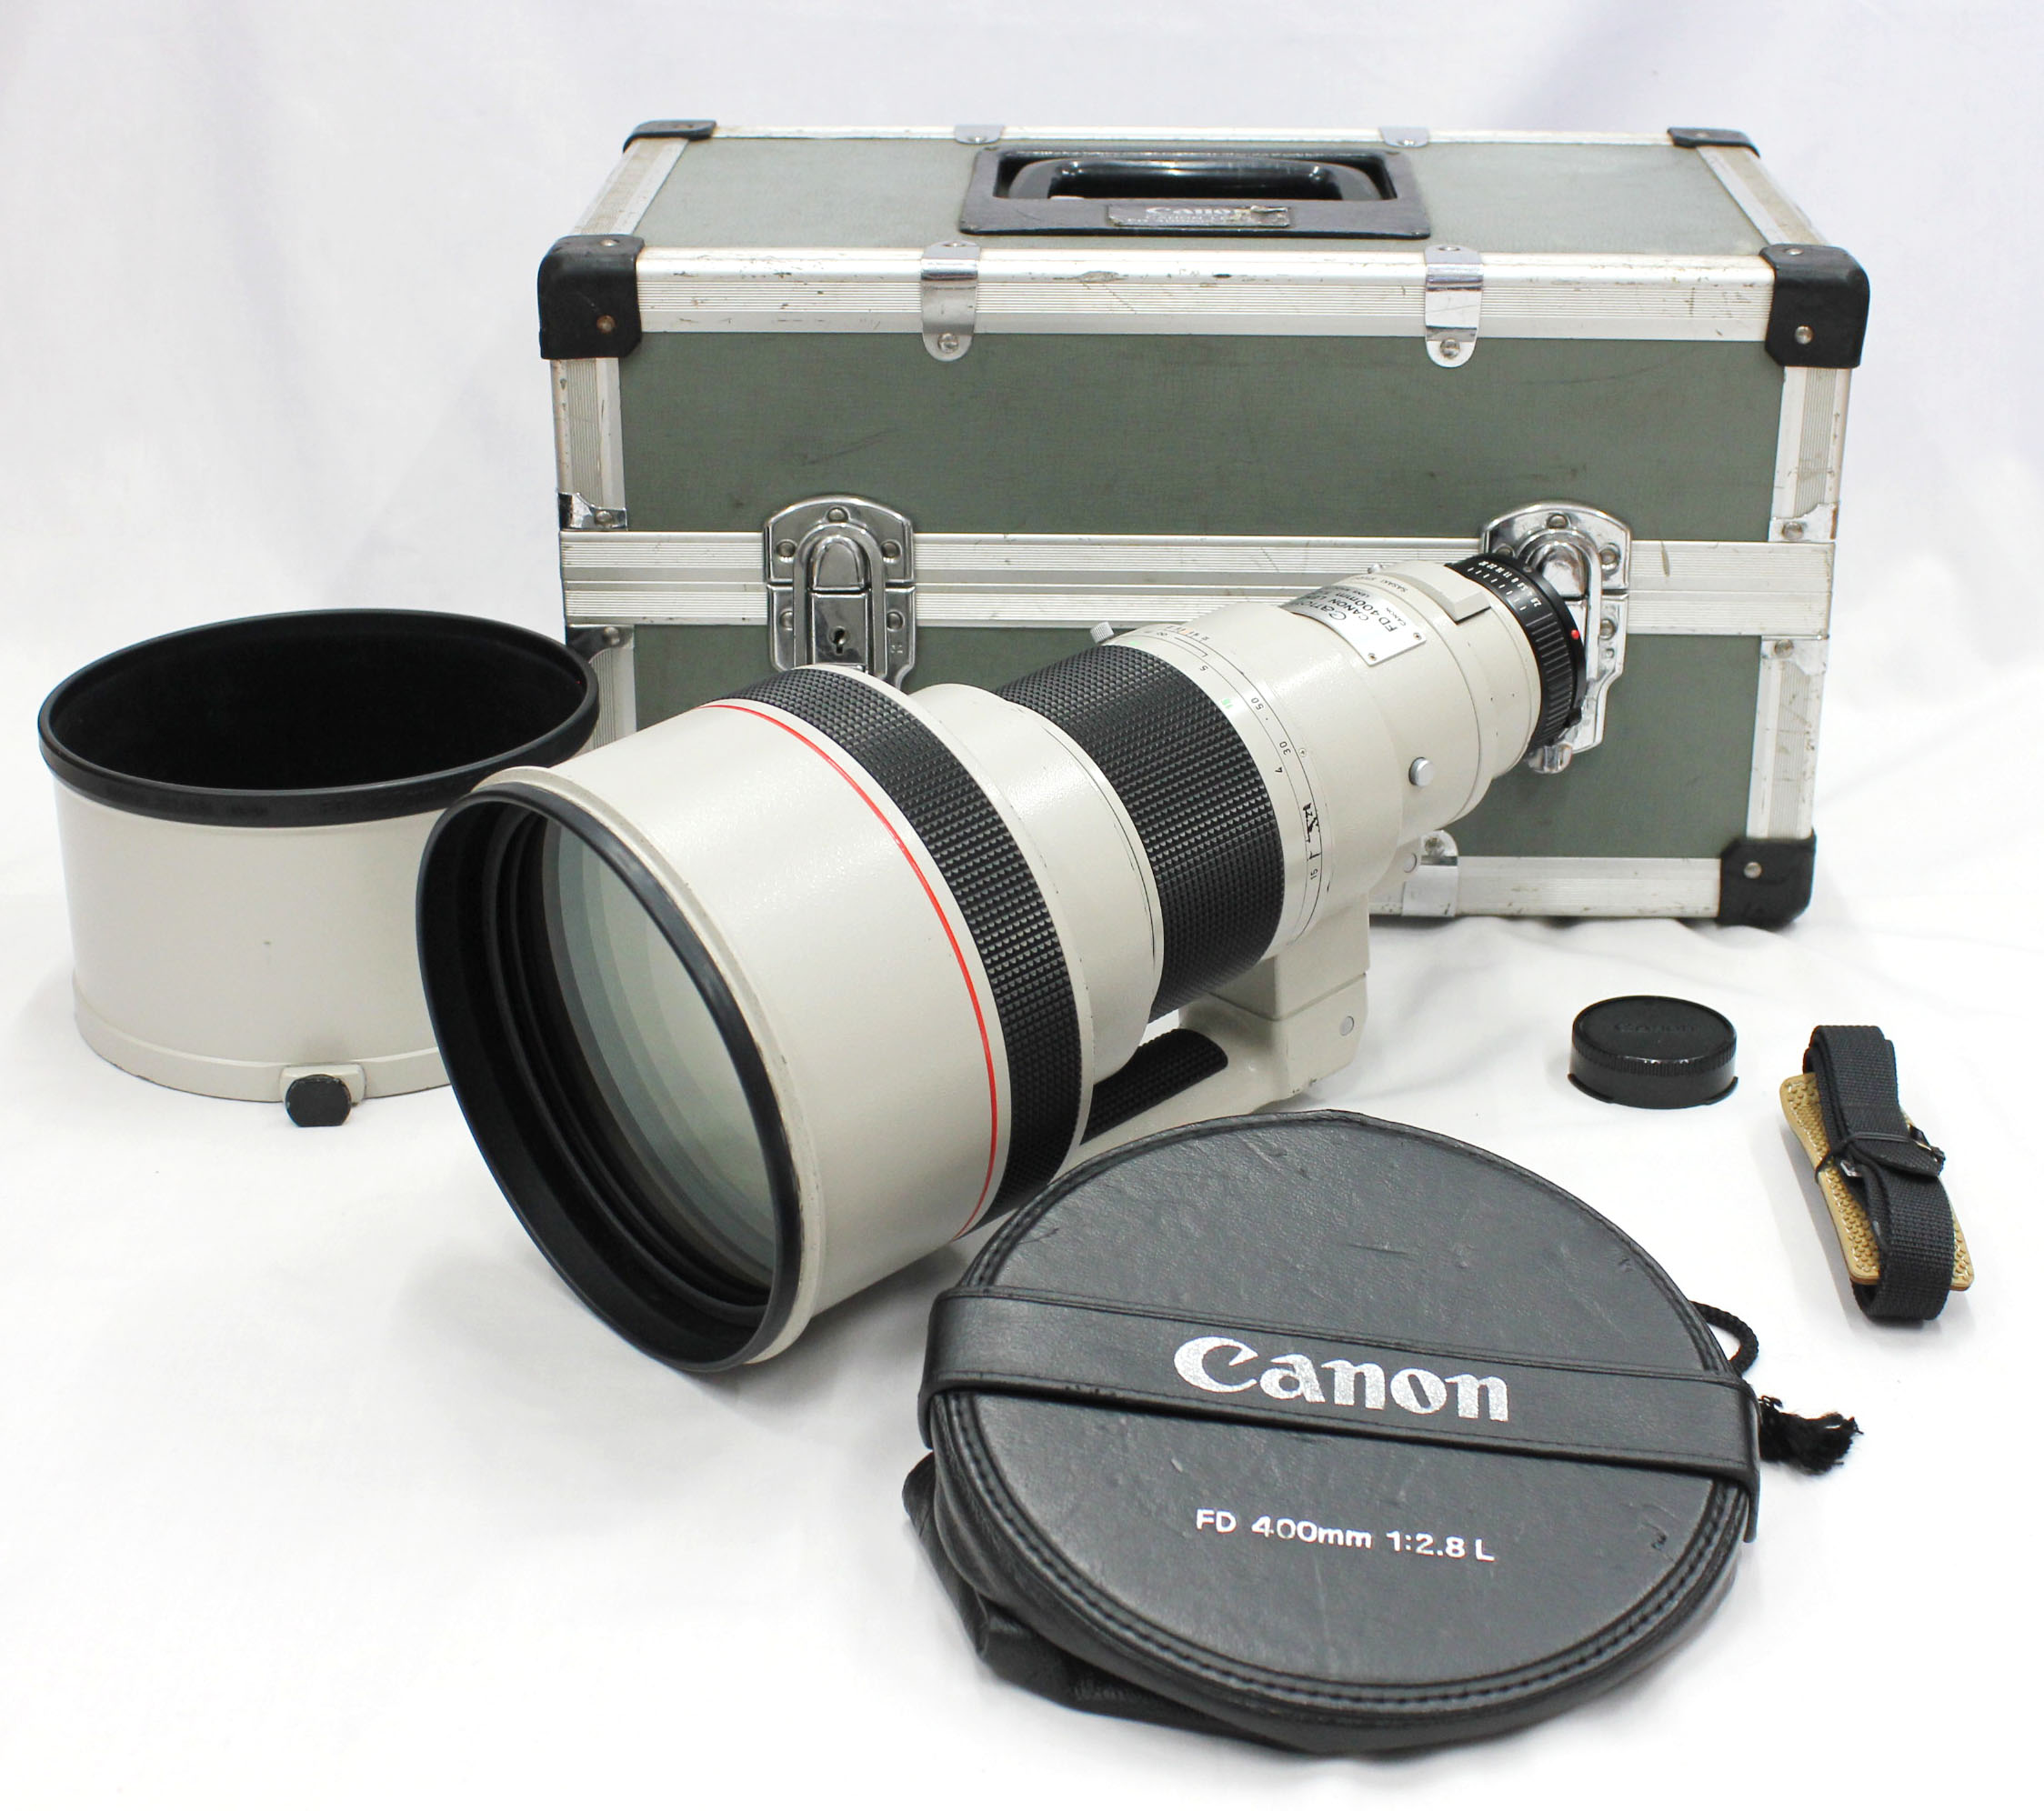  Canon New FD NFD 400mm F/2.8 L MF Telephoto Lens from Japan Photo 0